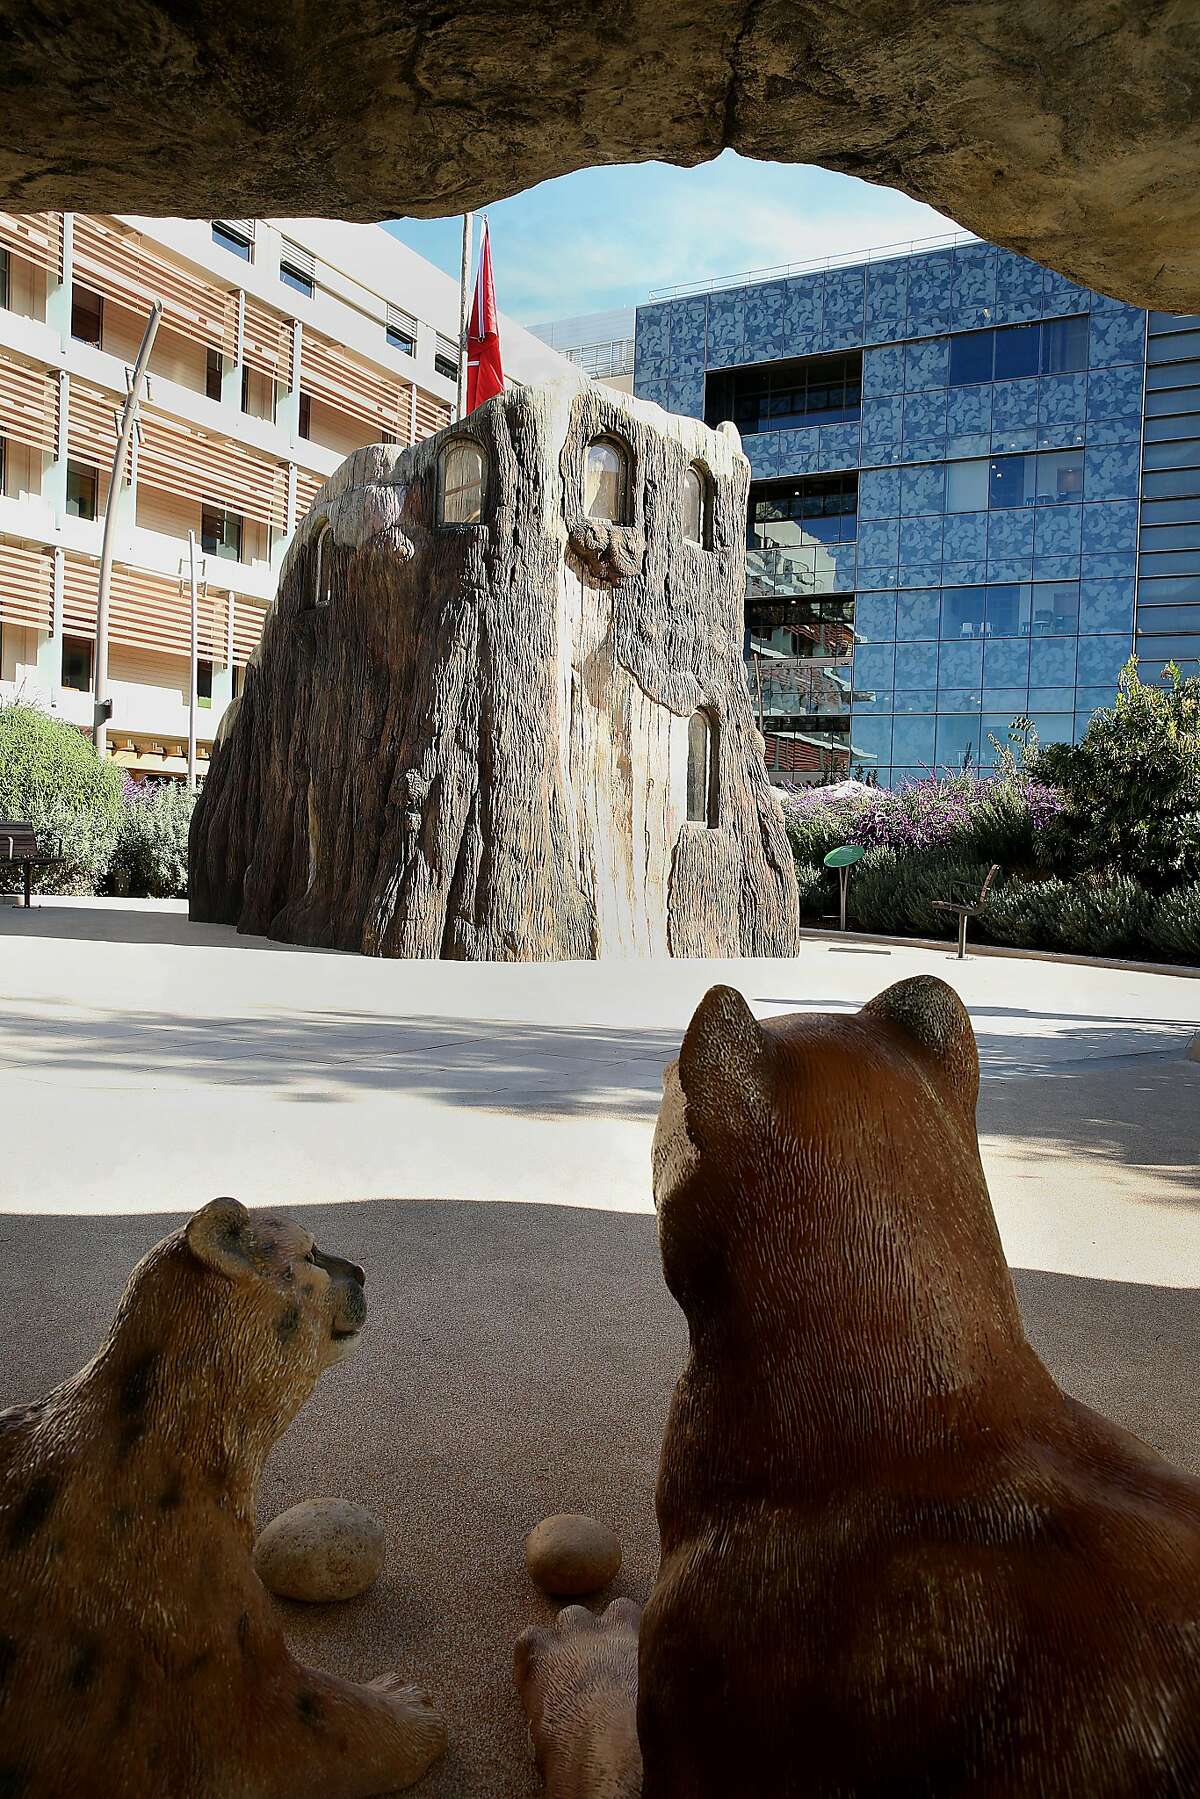 View of the playground fort and the new Lucile Packard Children's Hospital from the puma den of Dunlevie garden on Wednesday, December 6, 2017, in Palo Alto, CA.